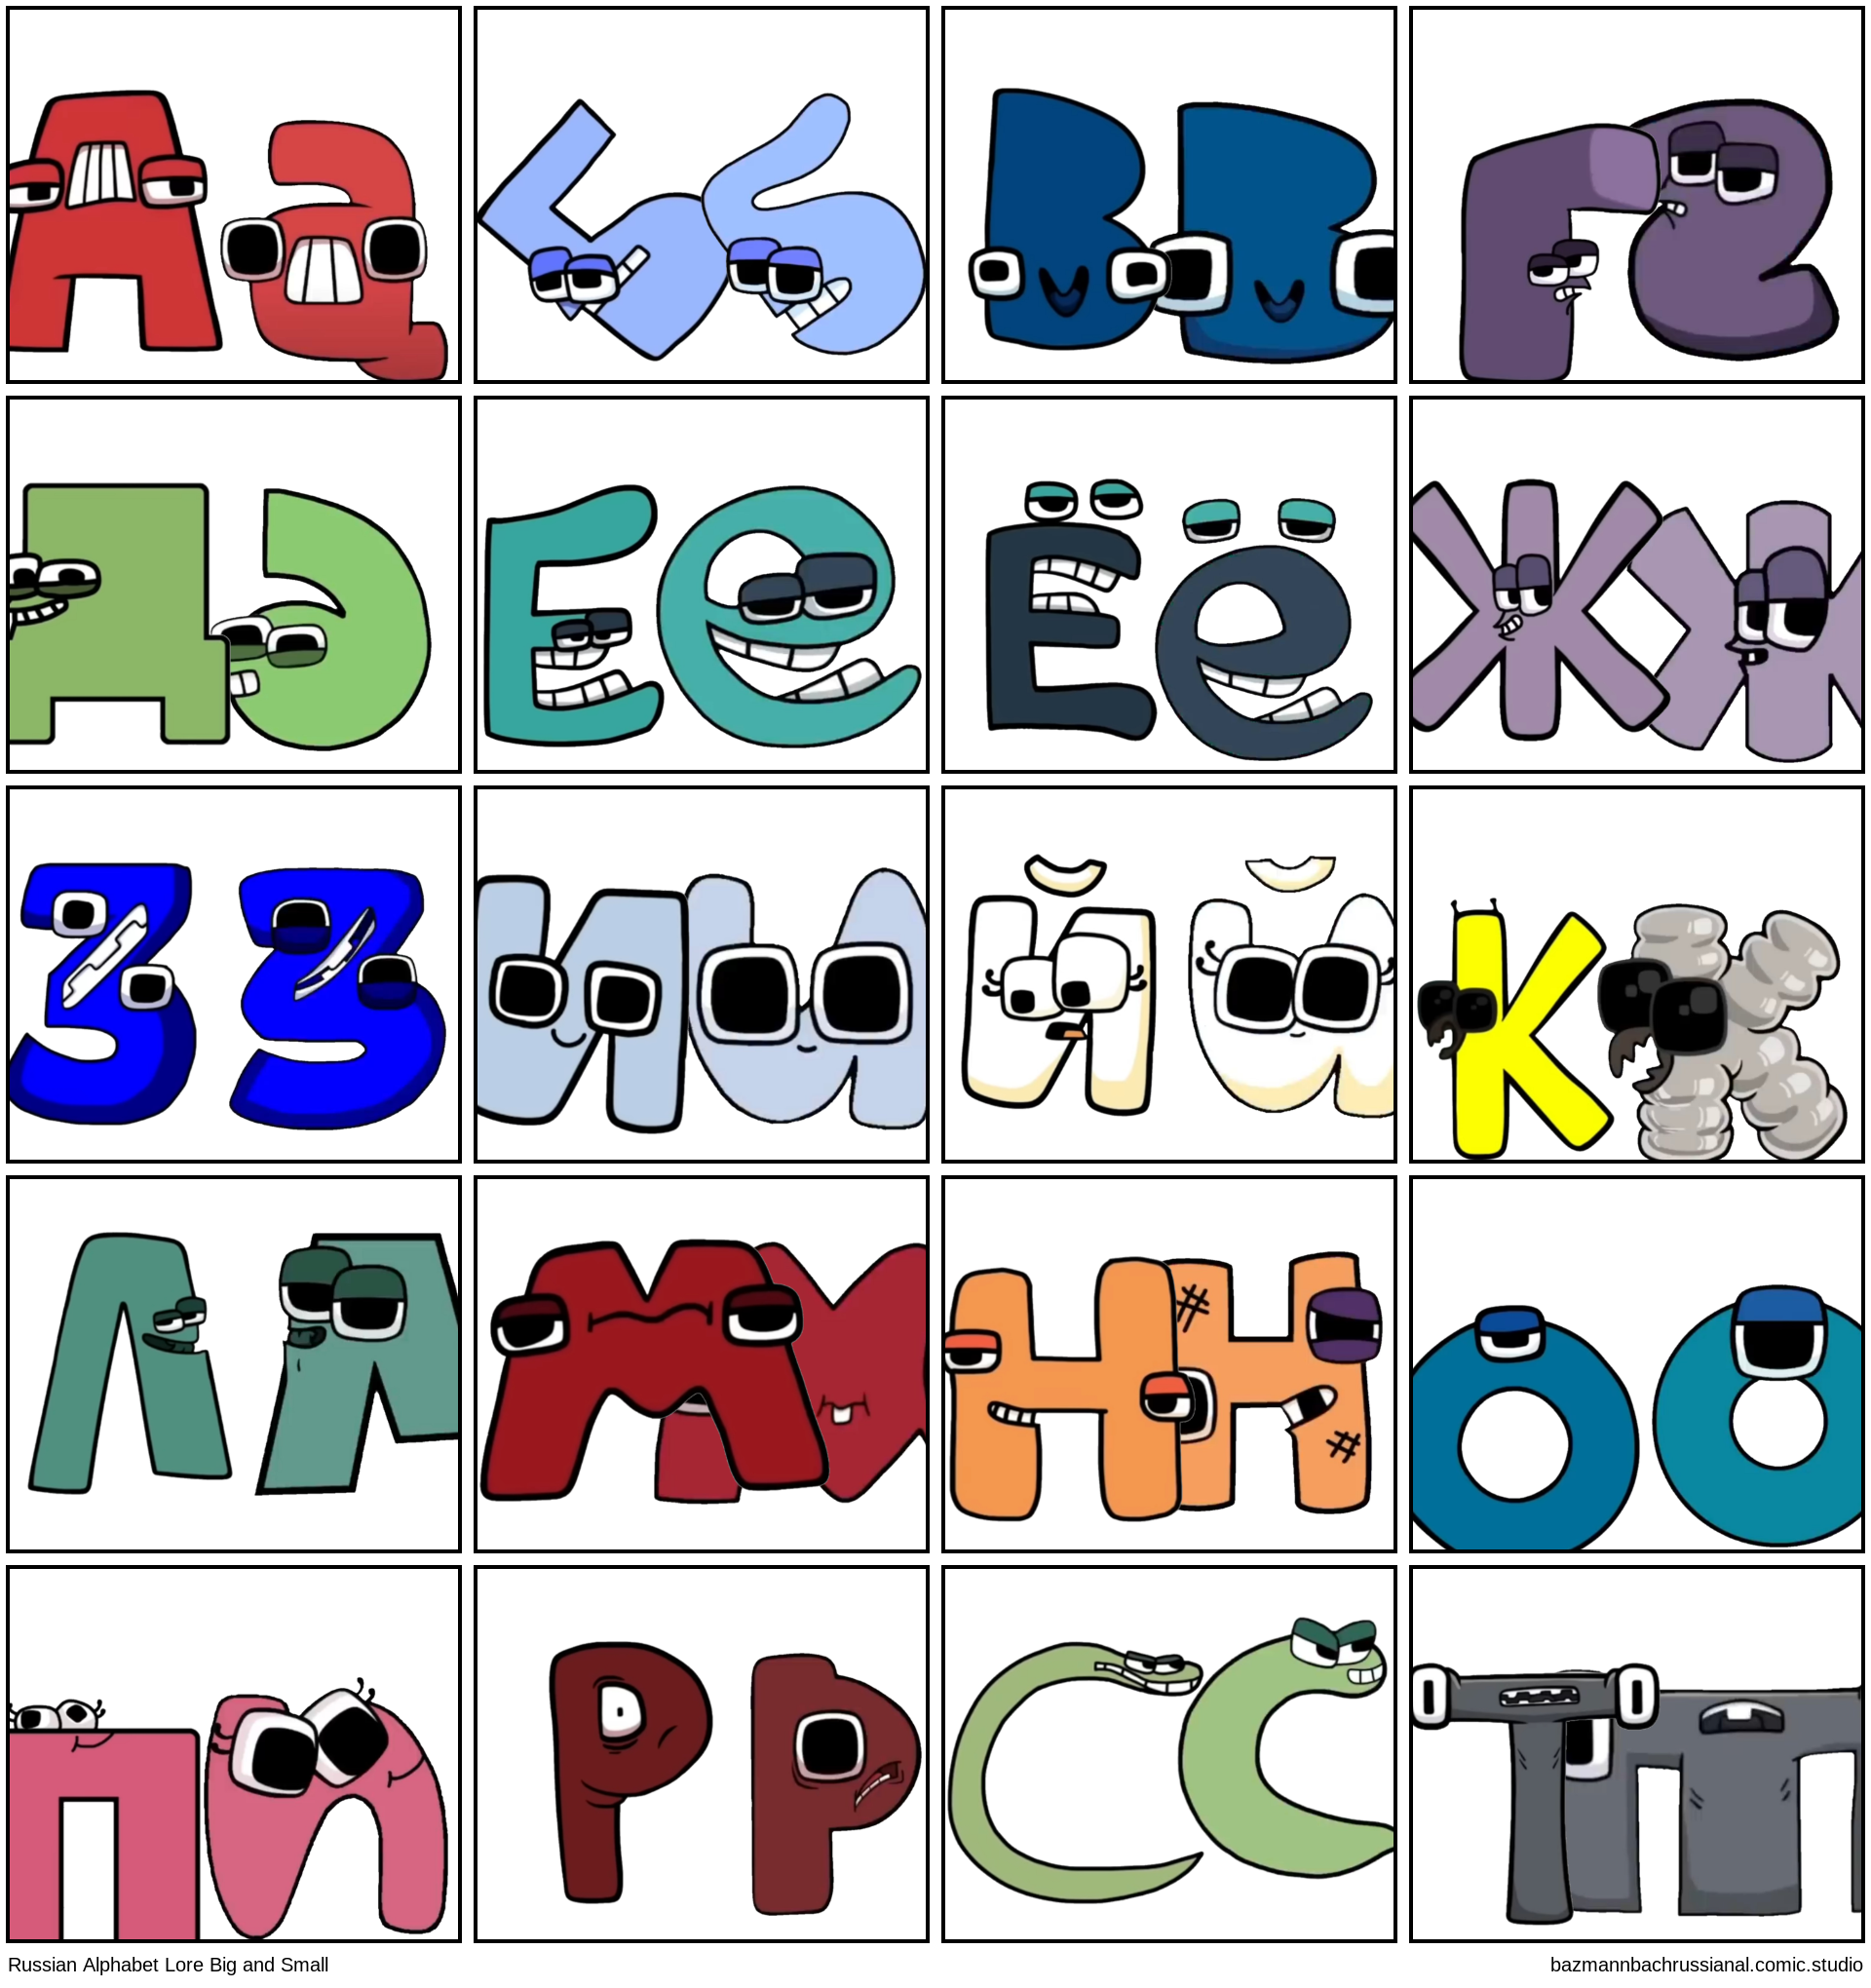 Russian Alphabet Lore Big and Small